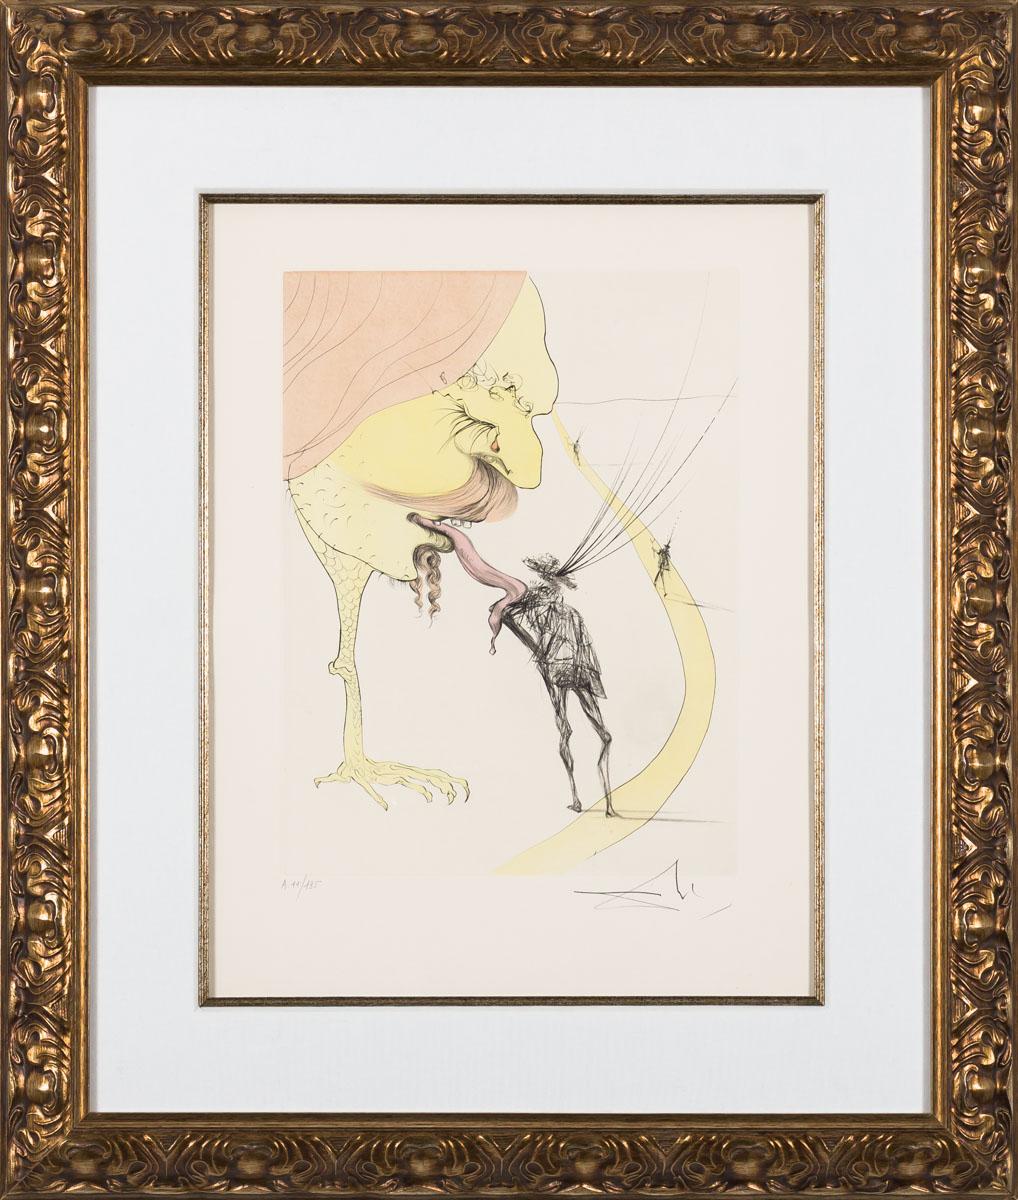 Picasso: A Ticket to Glory (Plate C), 1974 - Surrealist Print by Salvador Dalí